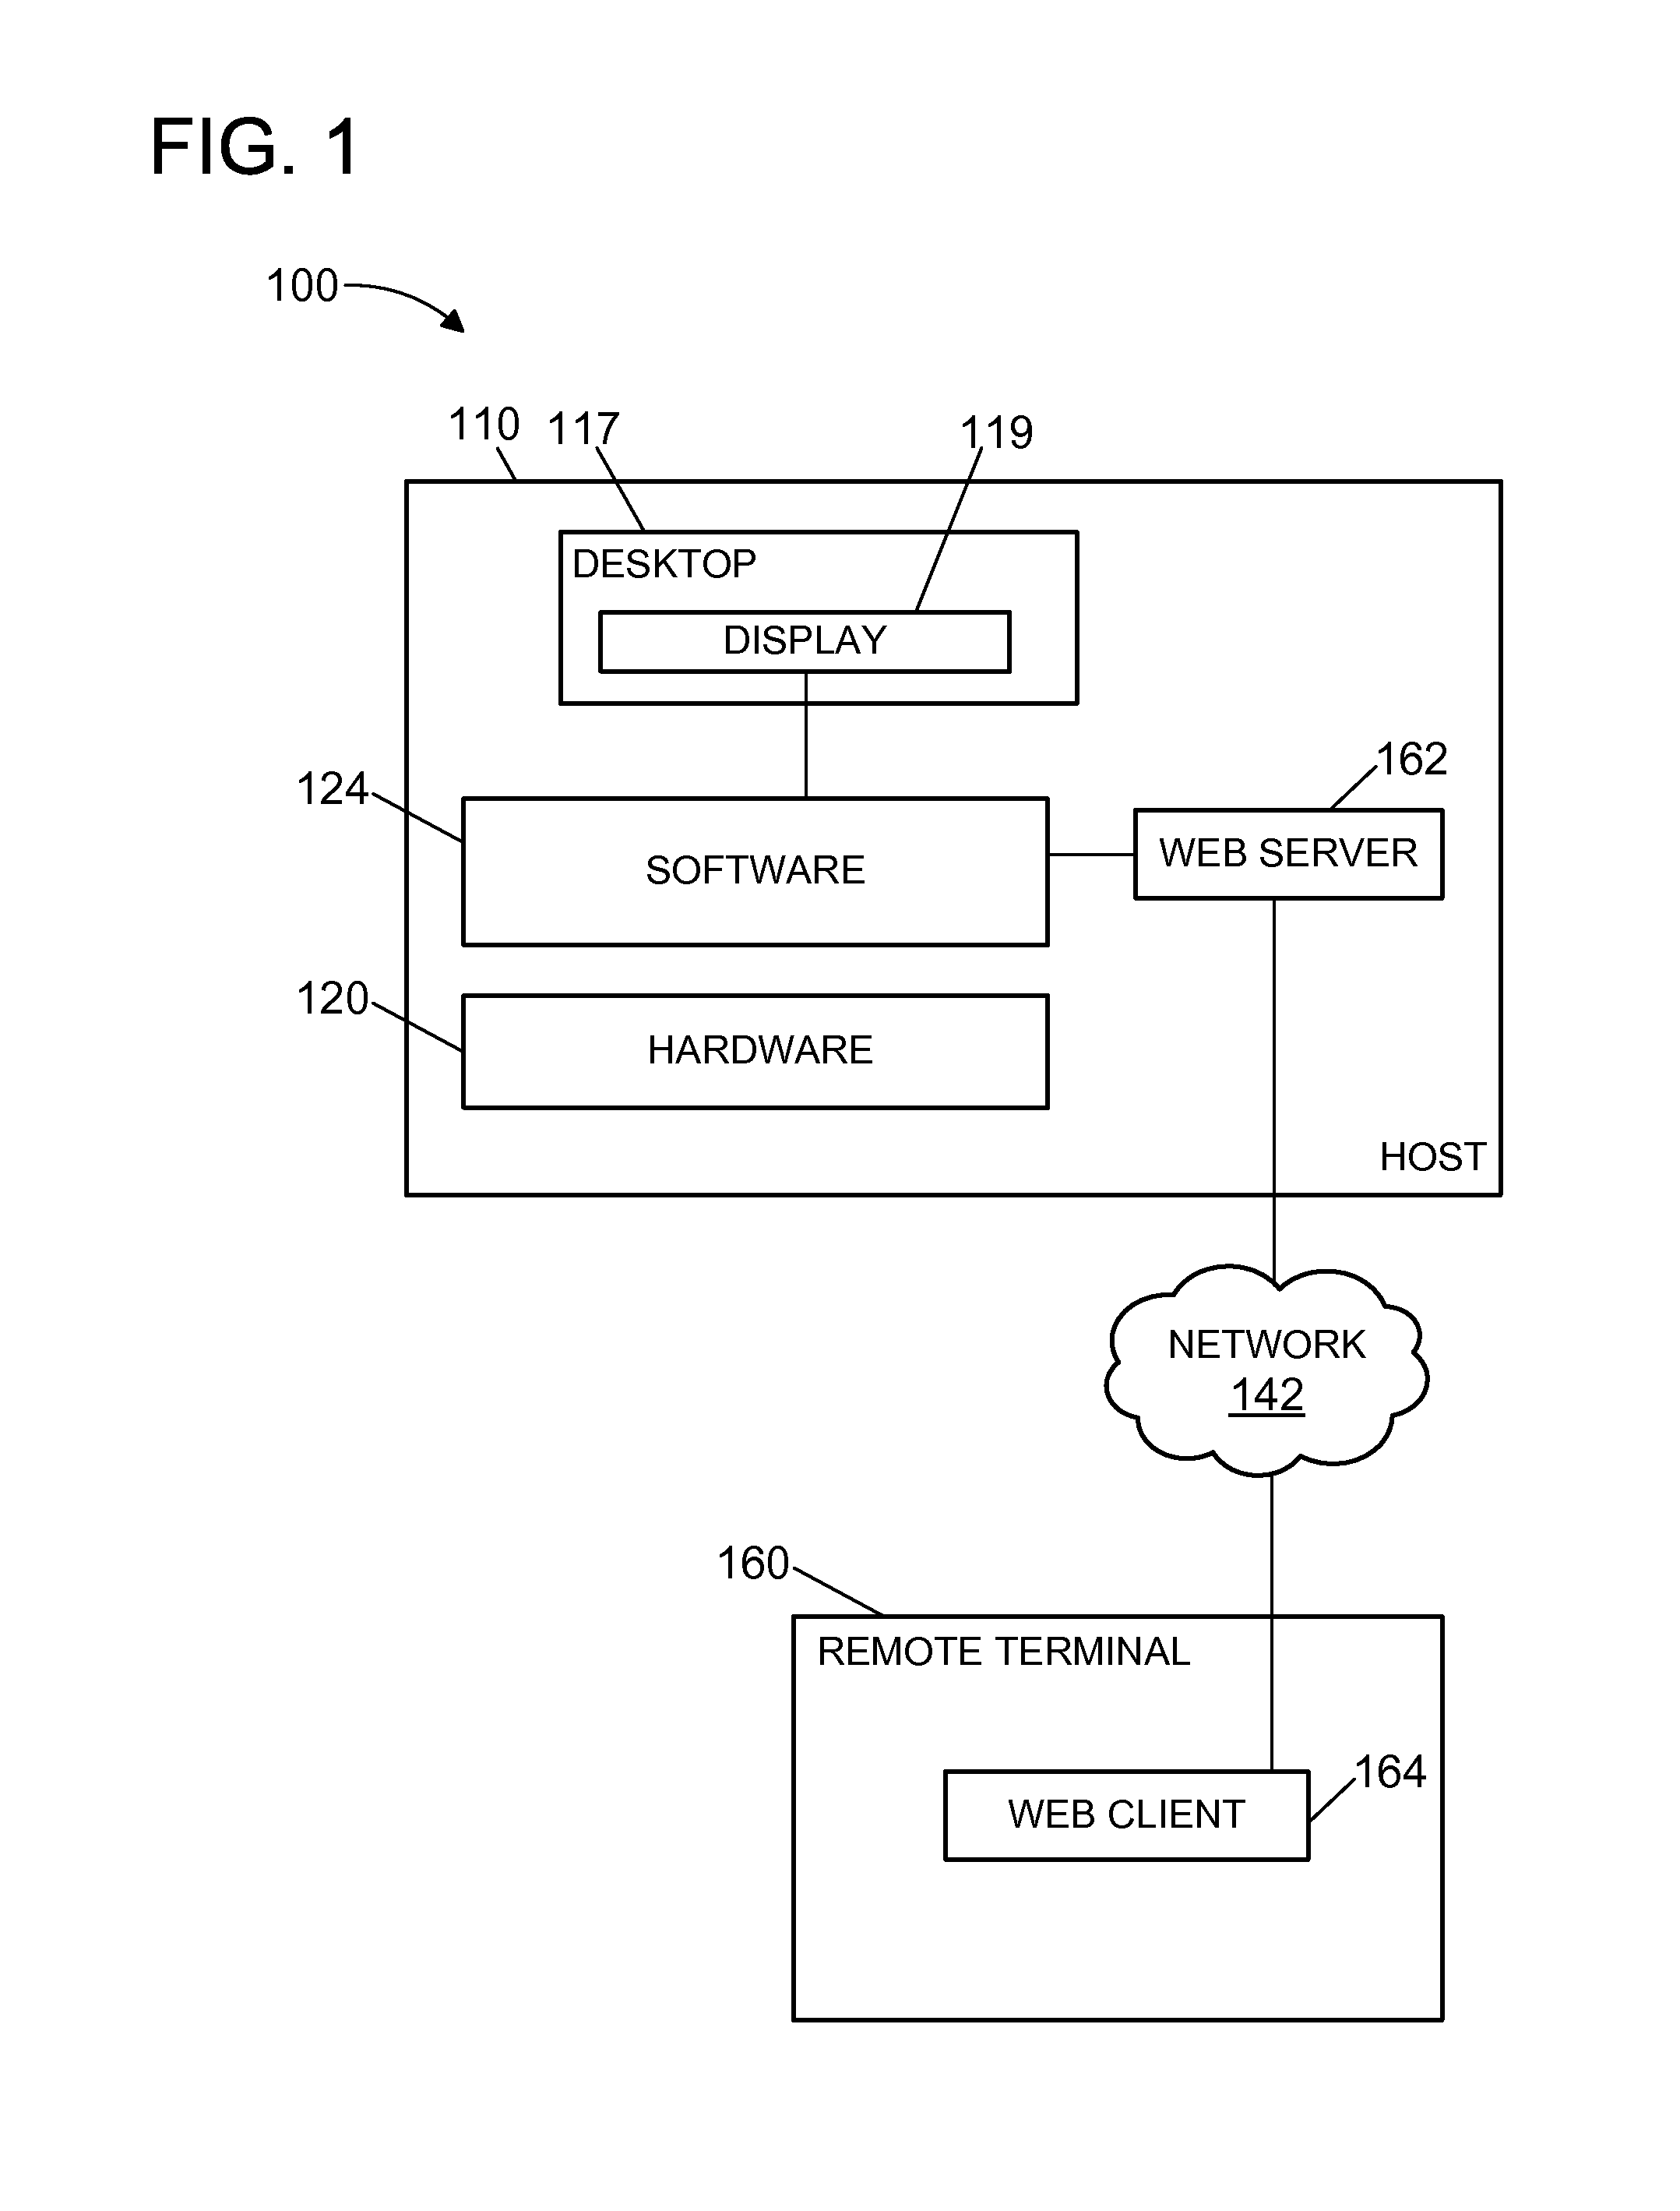 Systems and methods for applying a residual error image